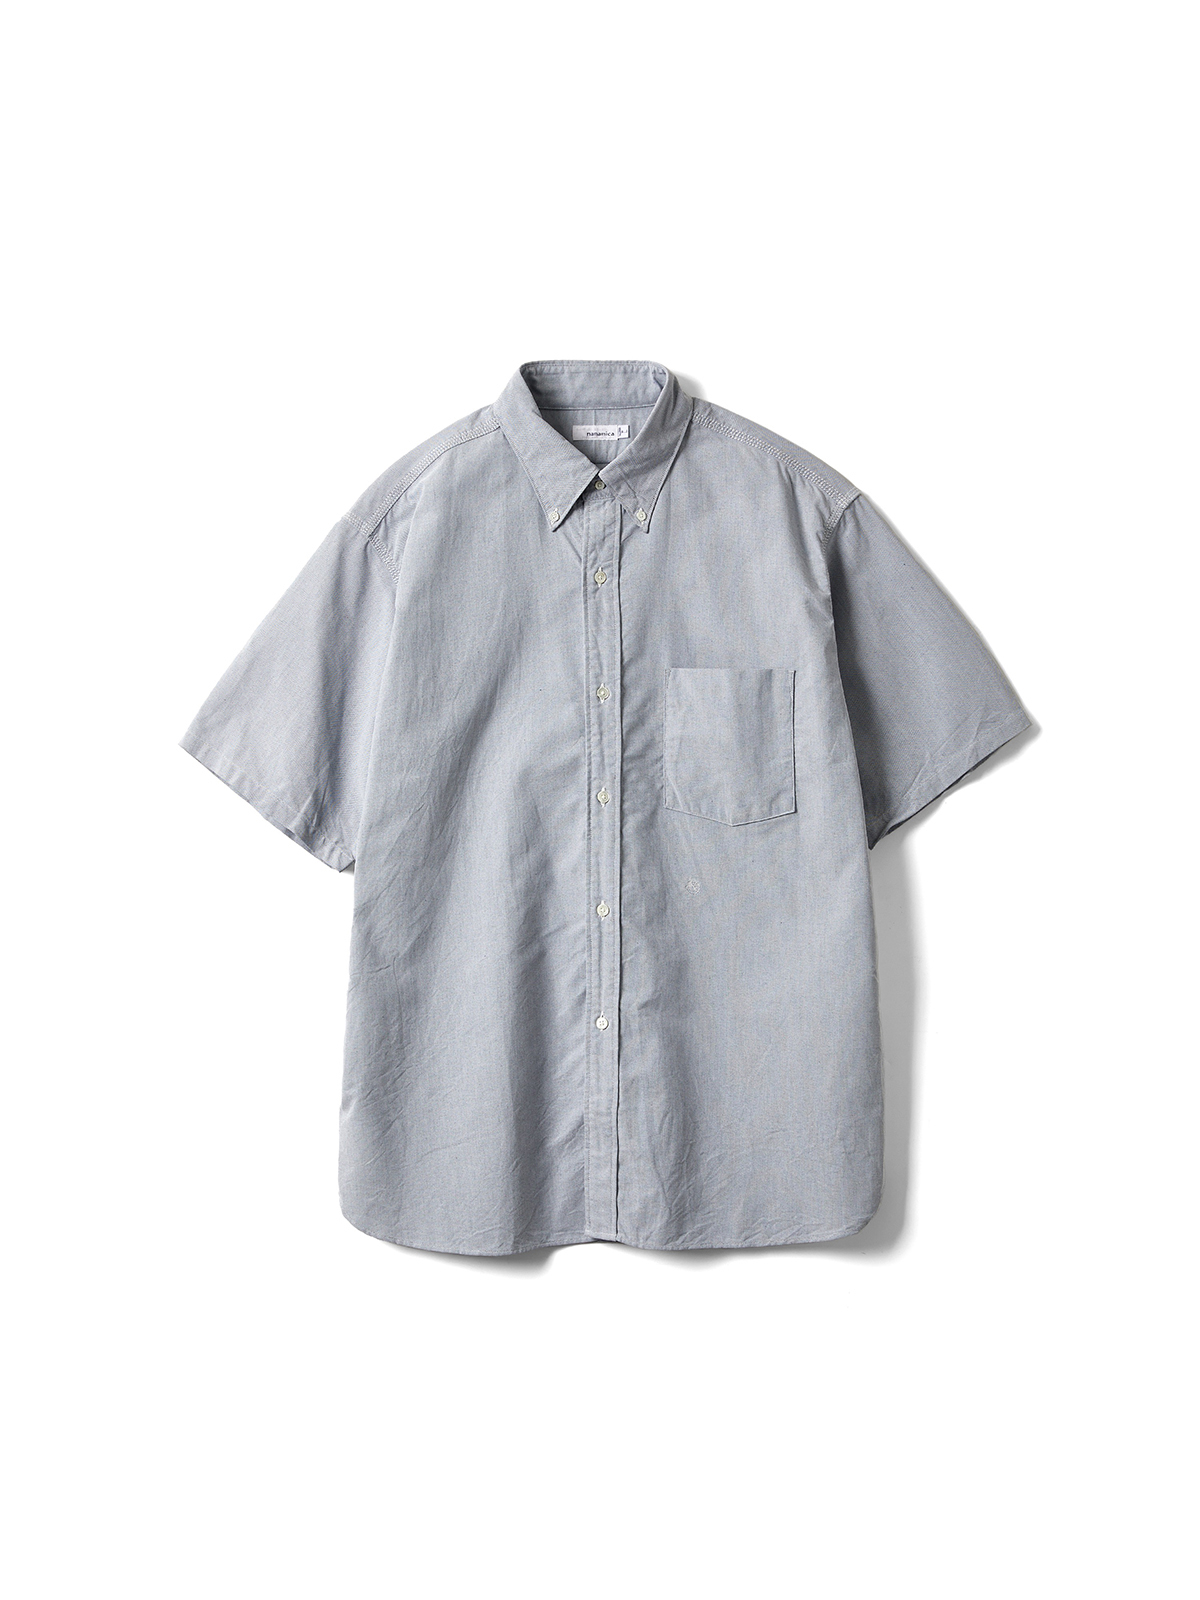 BUTTON DOWN WIND S/S SHIRT (GRAY)